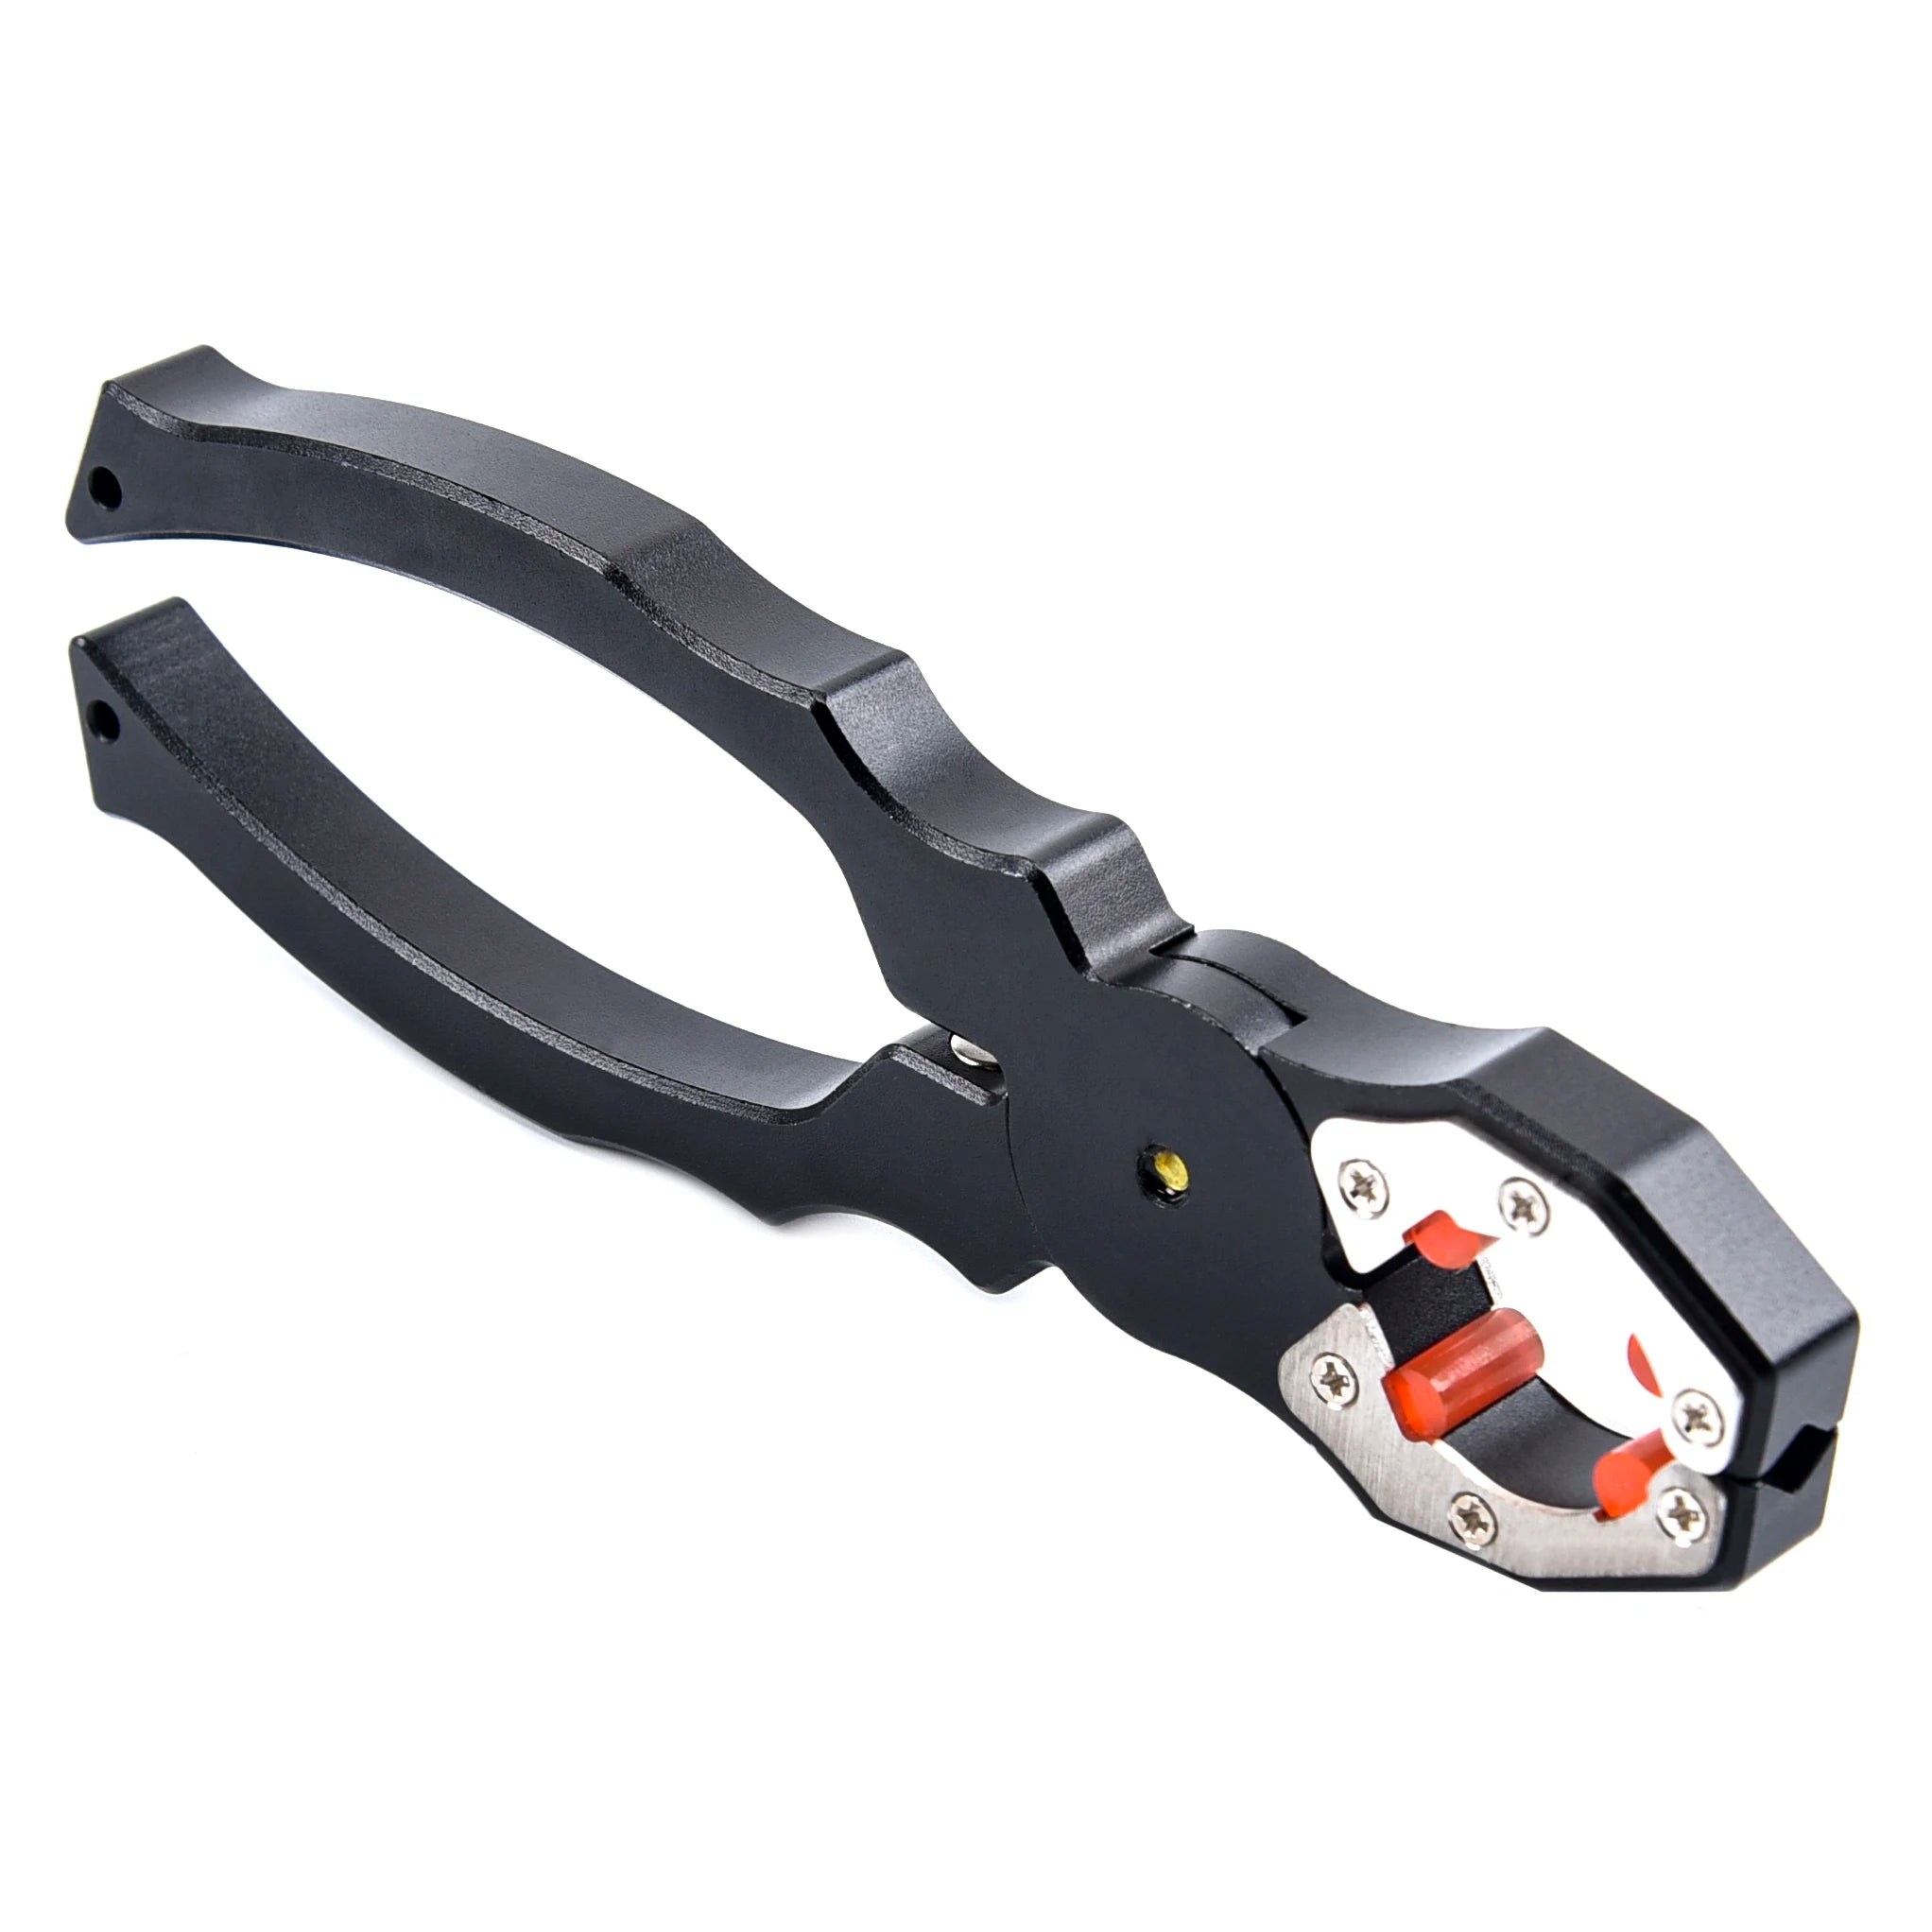 pliers can be used for shock absorber disassembly and assembly 